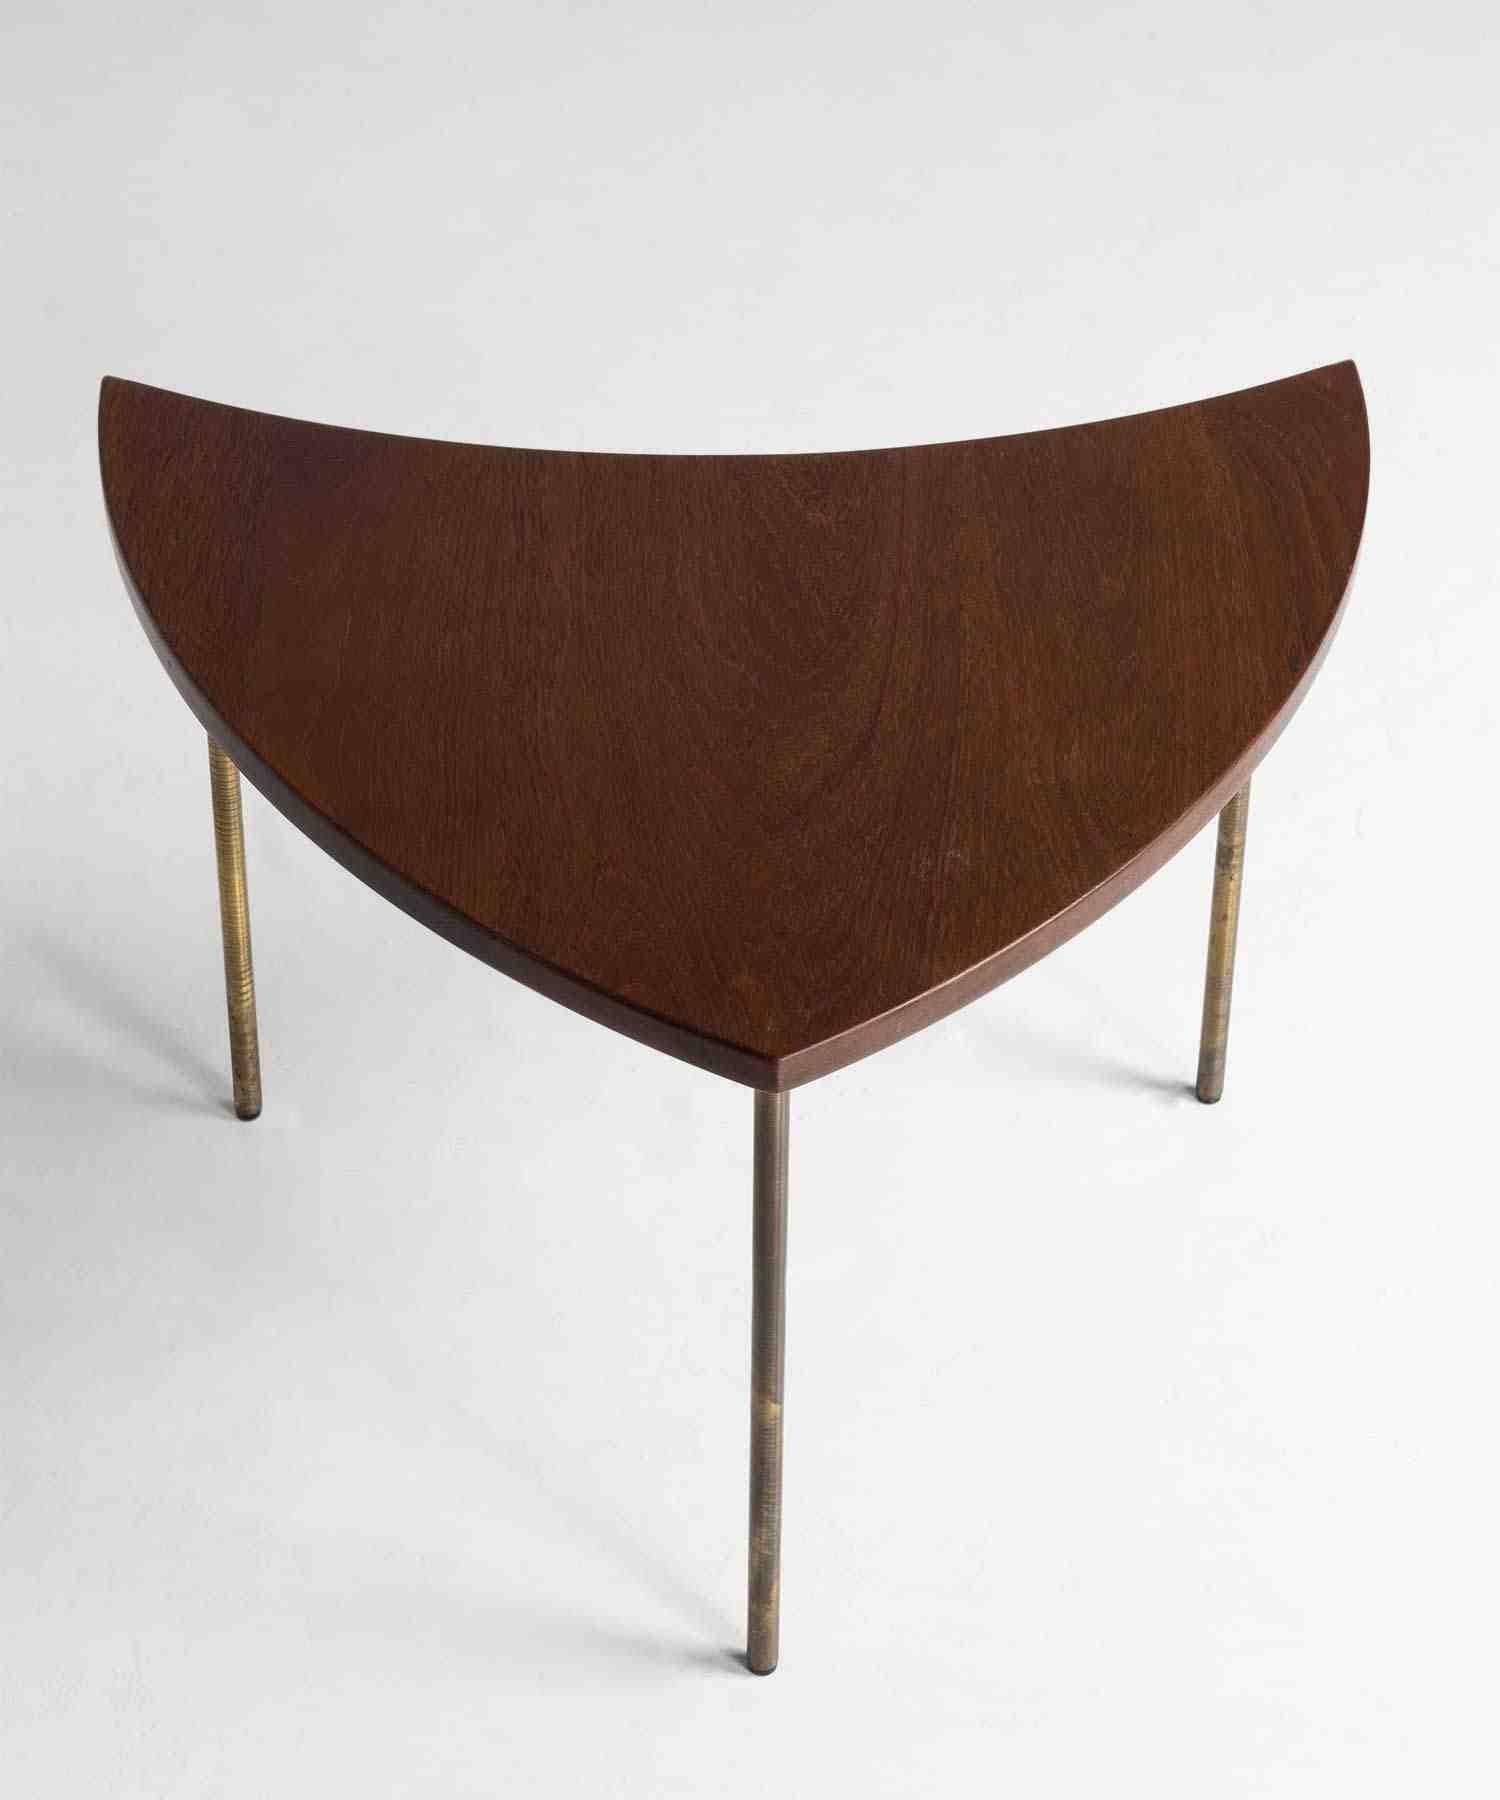 Pinwheel table by Peter Hvidt,

Denmark Circa 1960,

Series of six Model 523 tables with solid teak top on brass legs. Designed by Peter Hvidt and Orla Mølgaard-Nielsen. Can be configured in multiple ways.

Measures: 25.5” W x 18” D x 17.5” H